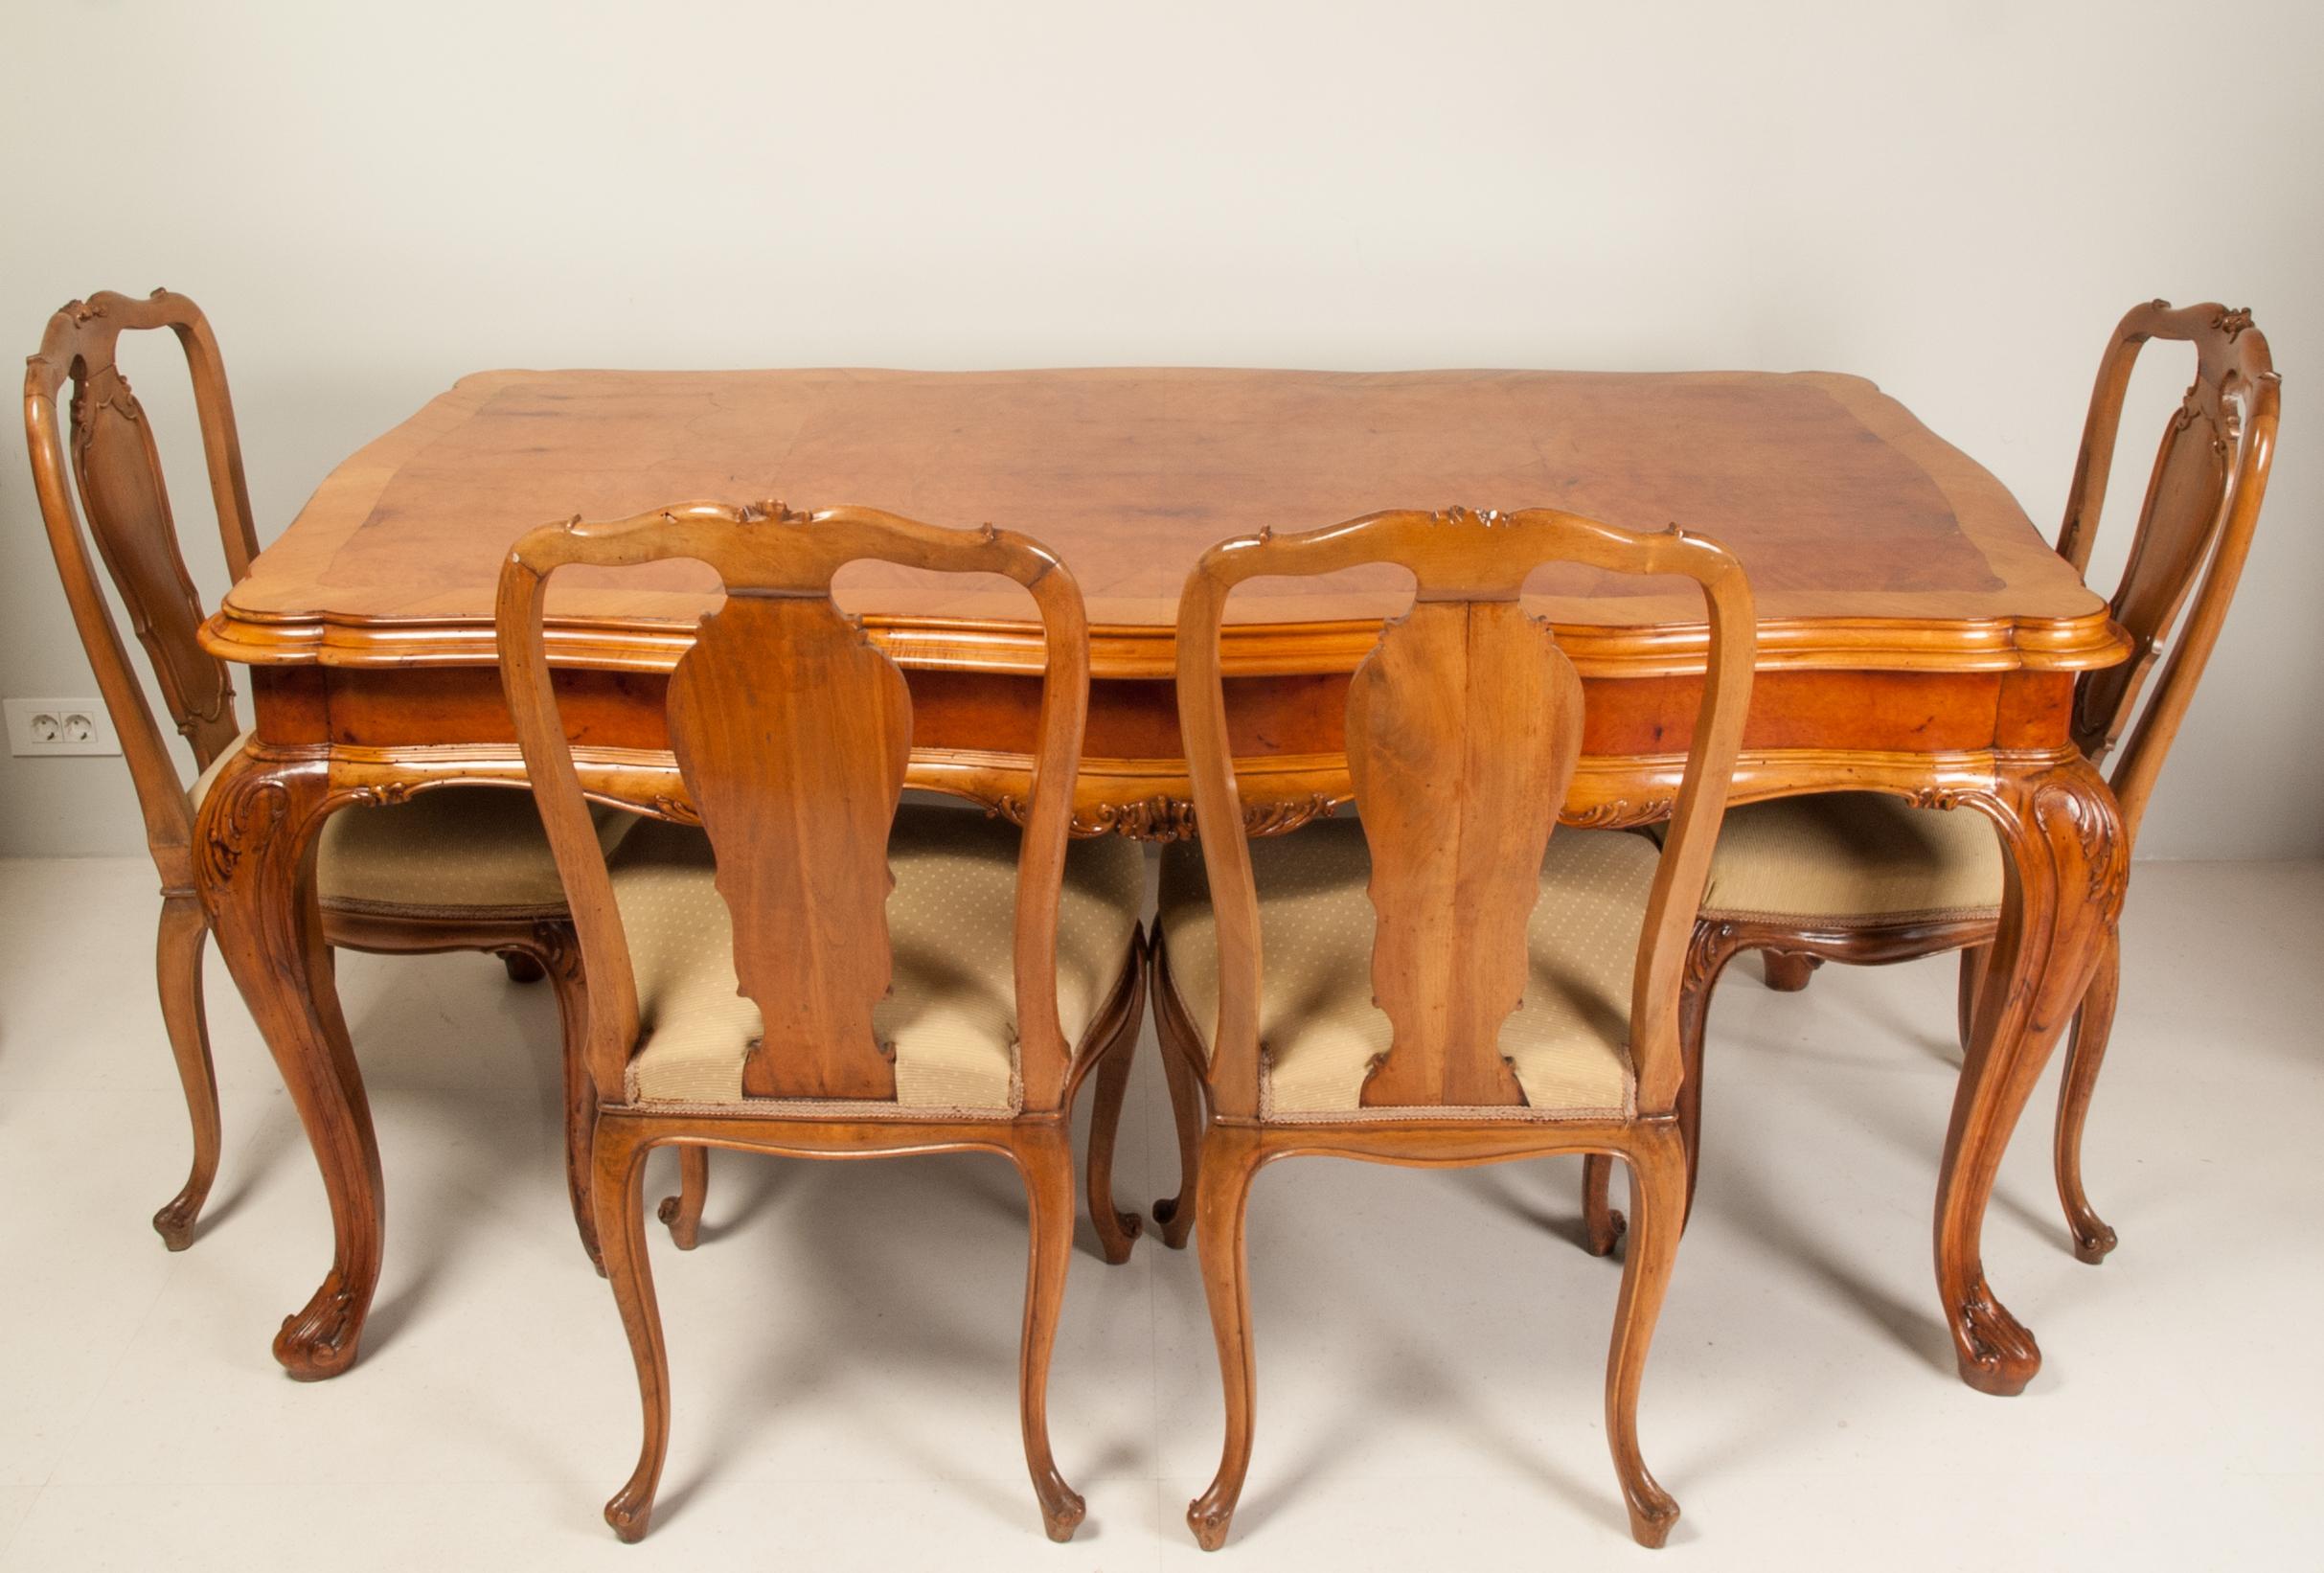 Large and massive early 20th century extendable walnut and poplar root veneer dining table. Below the top are two pull-out drawers to which additional boards are laid on. Ornate frame over four cabriole legs. Each of the legs being carved at the